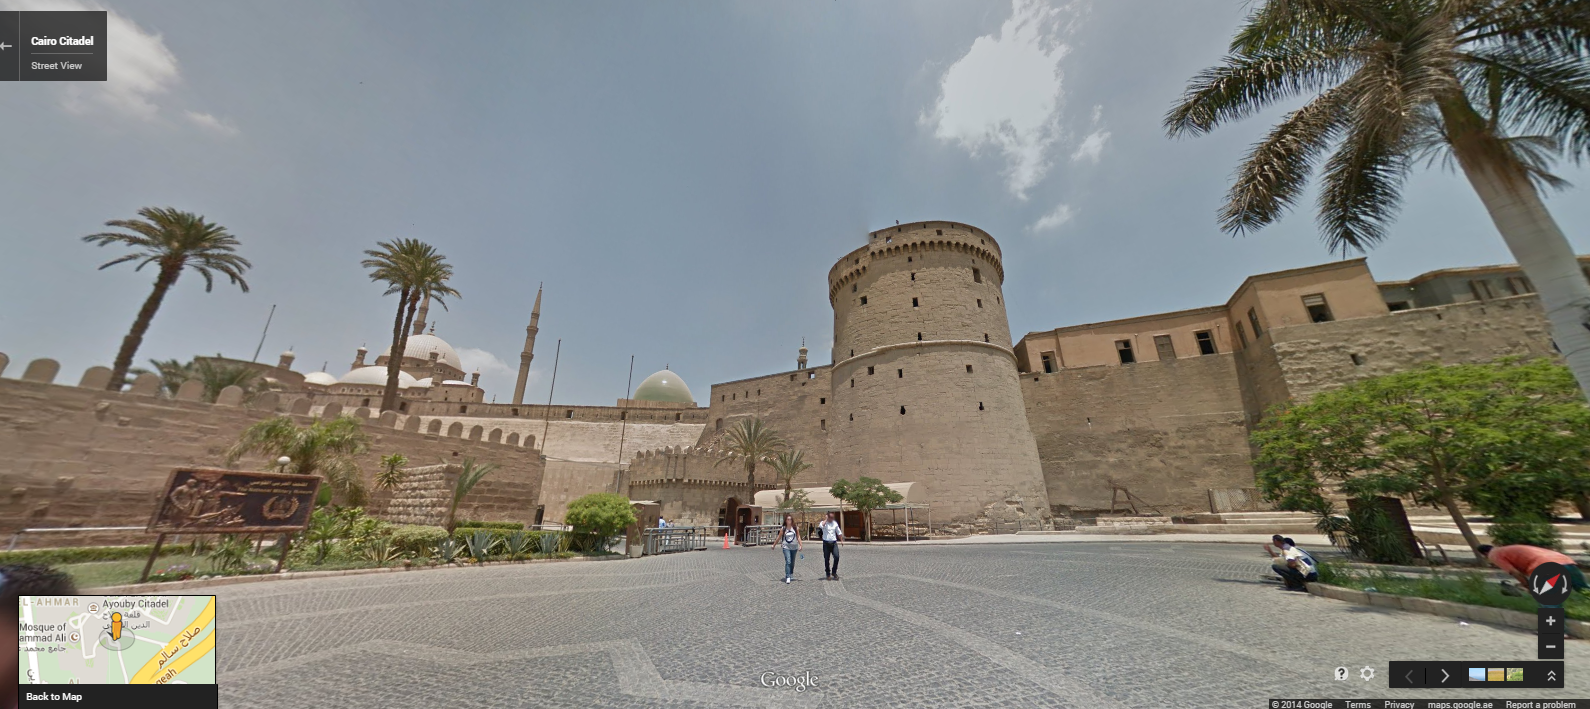 The Cairo Citadel entrance. Click here to view in Google Street View.